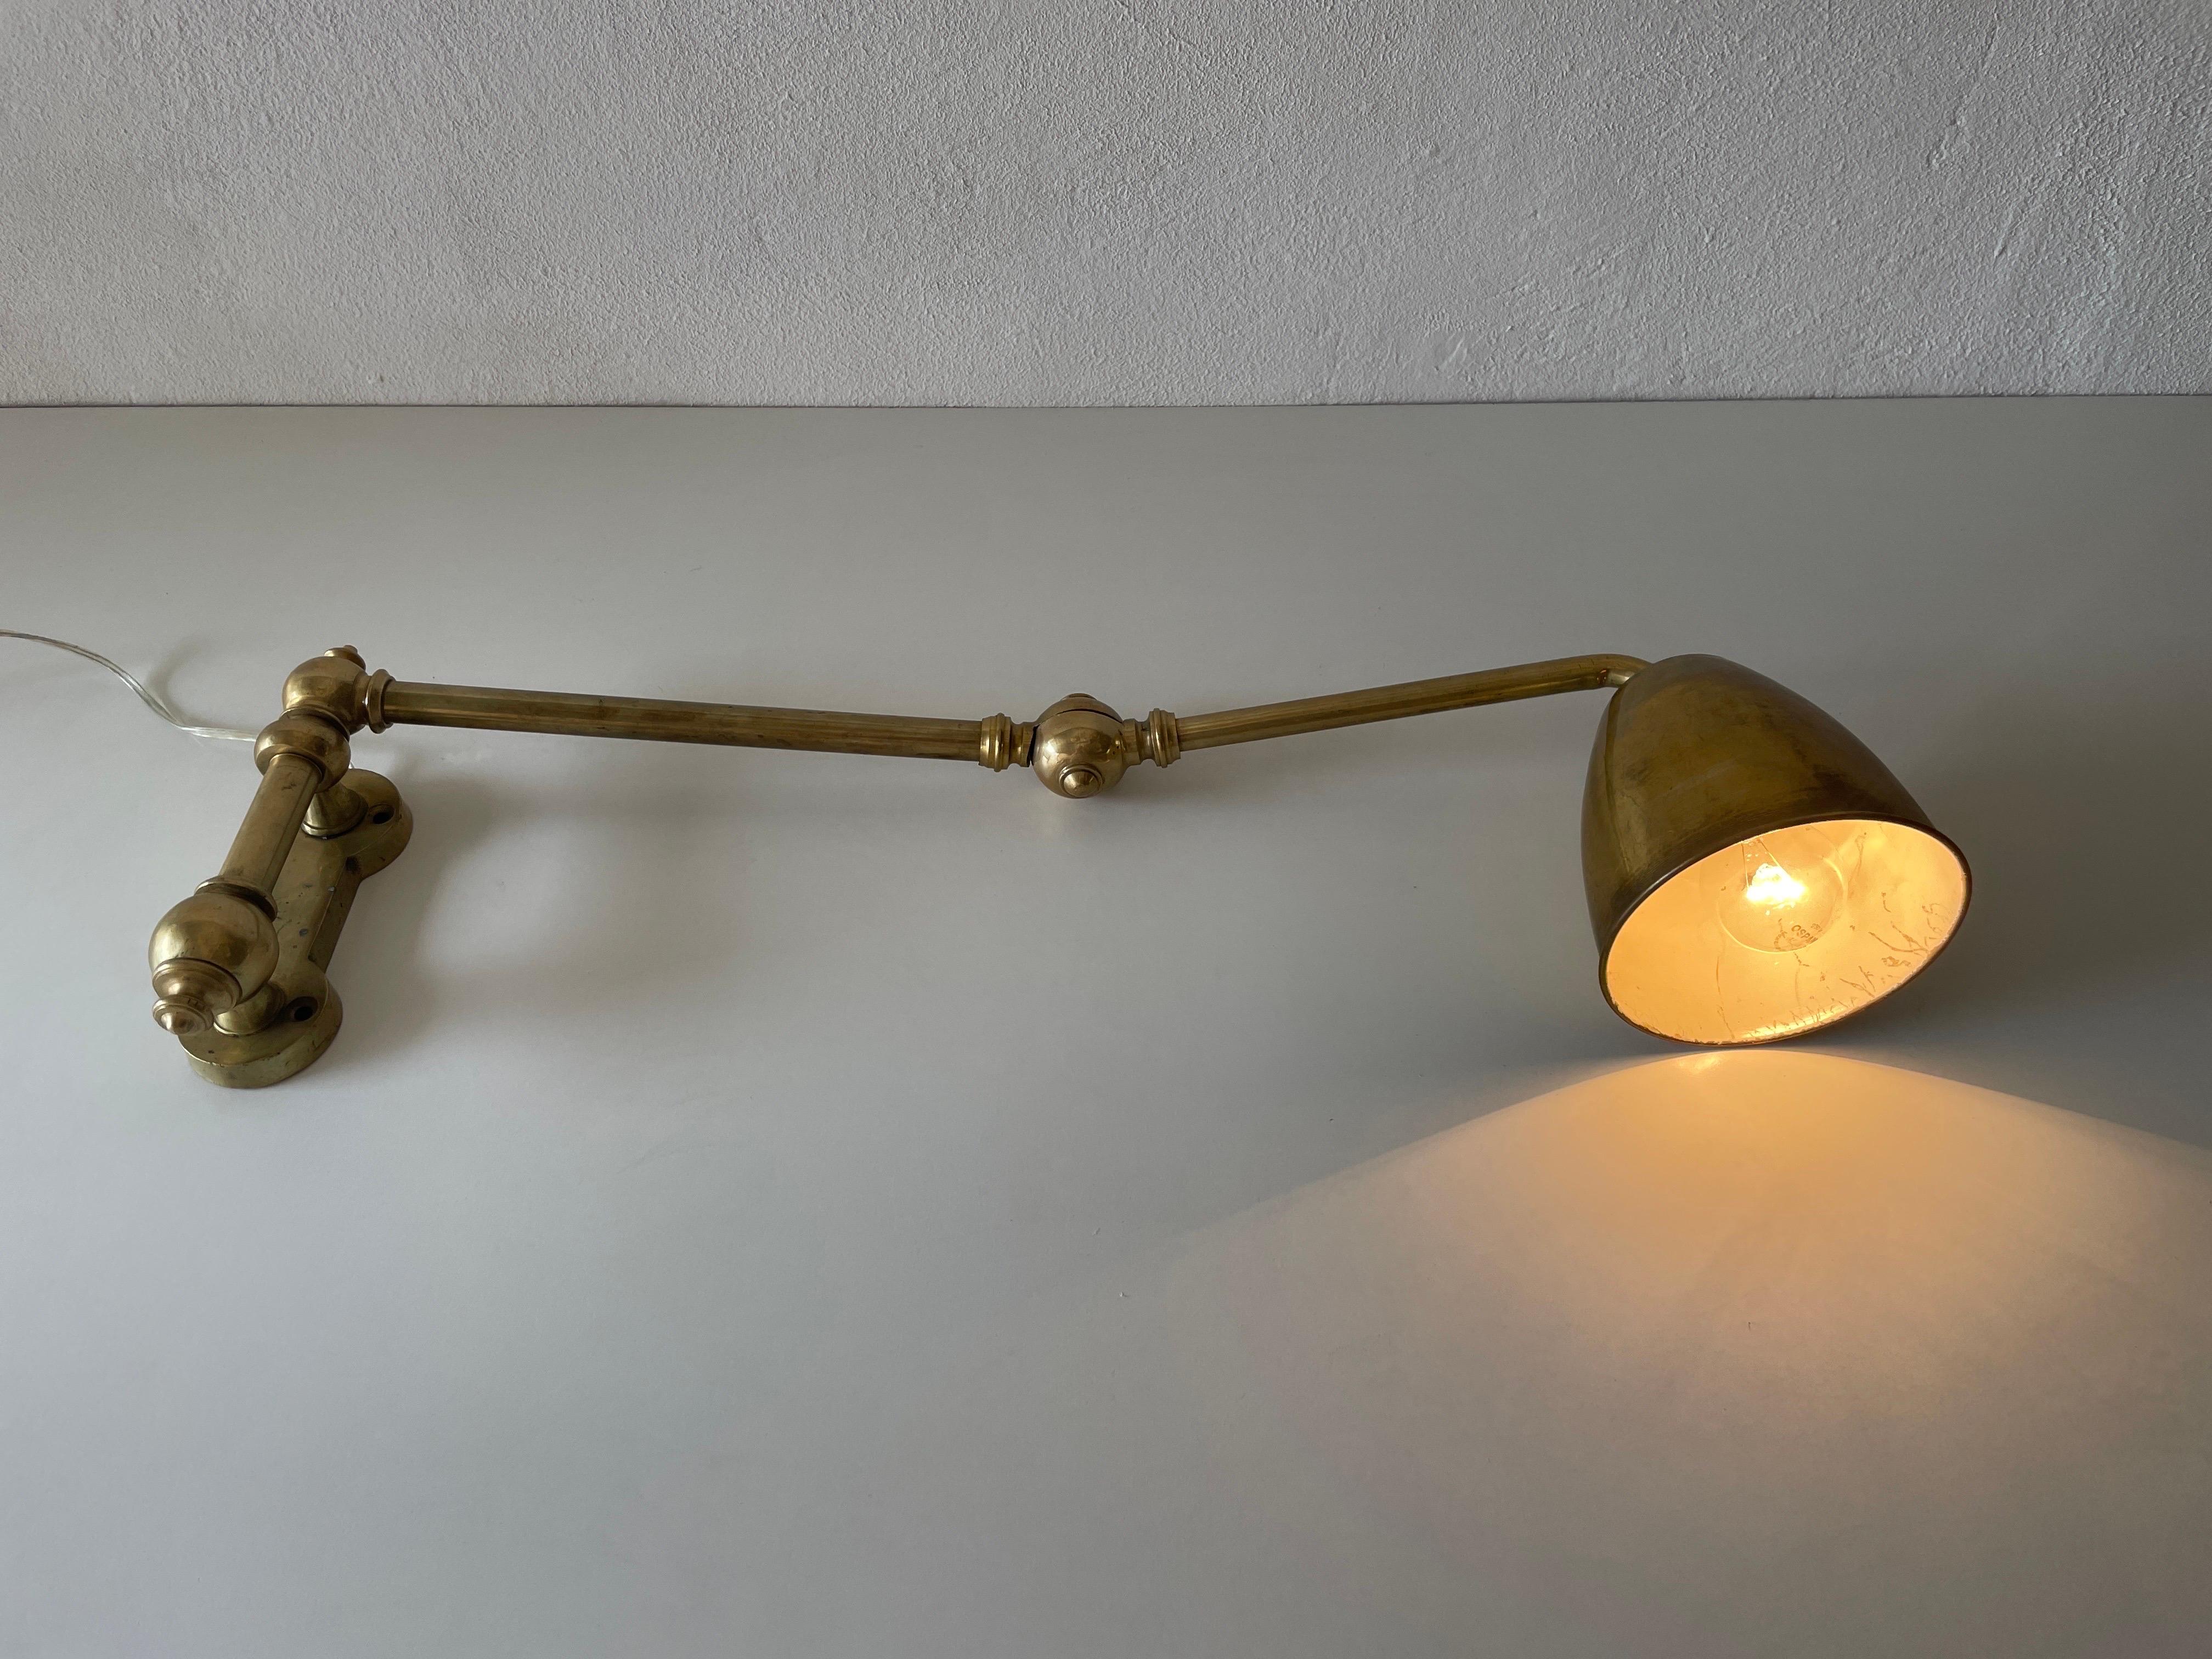 Full Brass Adjustable Head and Arm Industrial Task Wall Lamp, 1940s, Germany For Sale 7